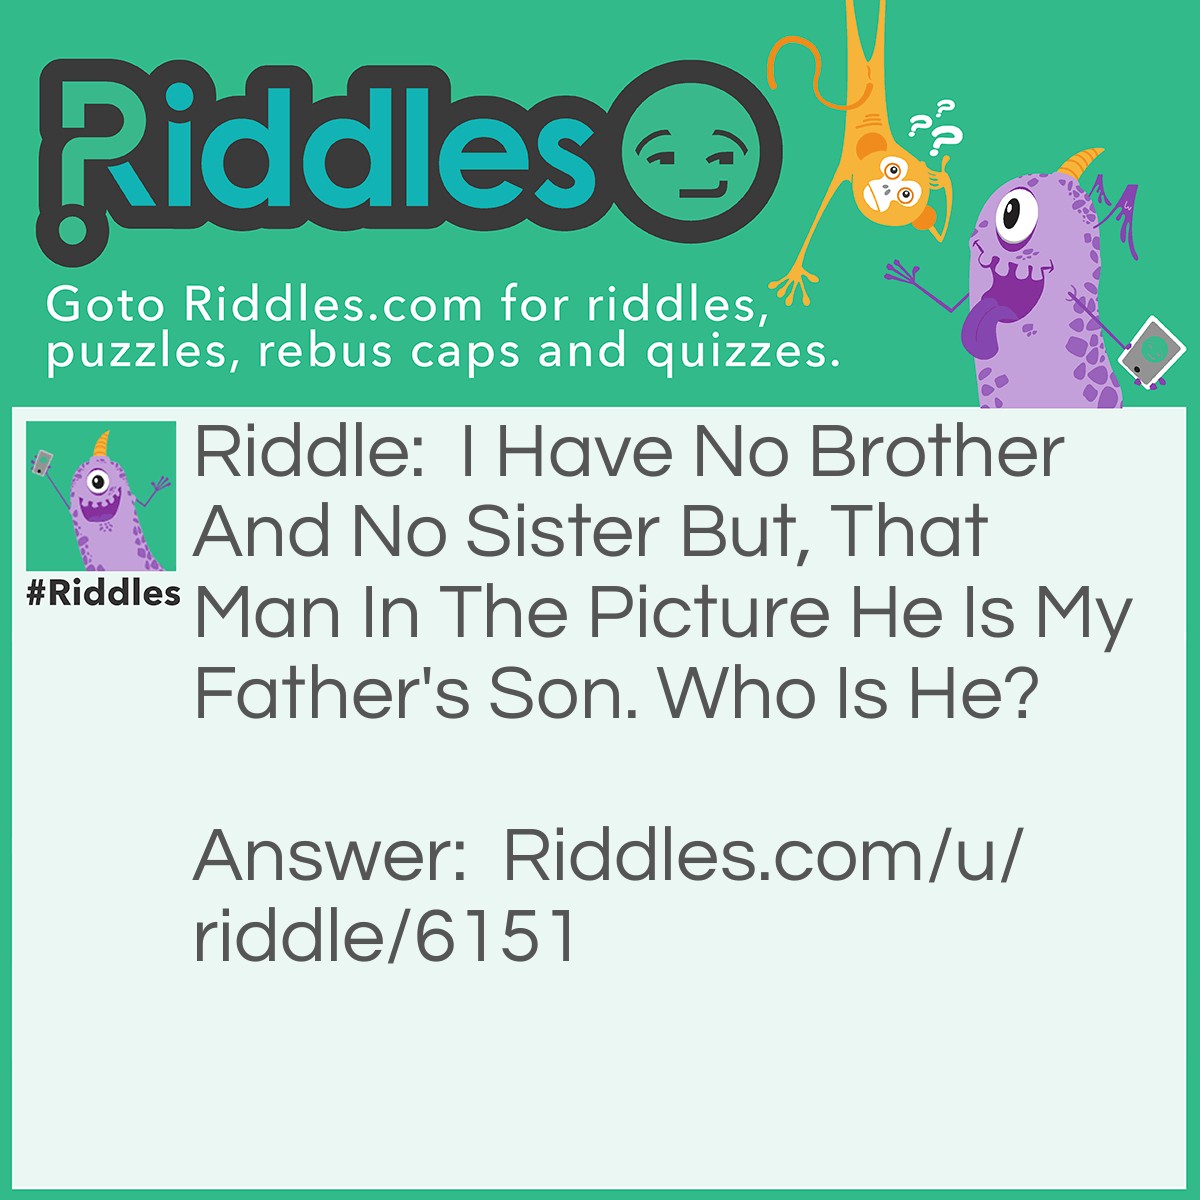 Riddle: I Have No Brother And No Sister But, That Man In The Picture He Is My Father's Son. Who Is He? Answer: It's Me. I Am The Only Child To My Father.